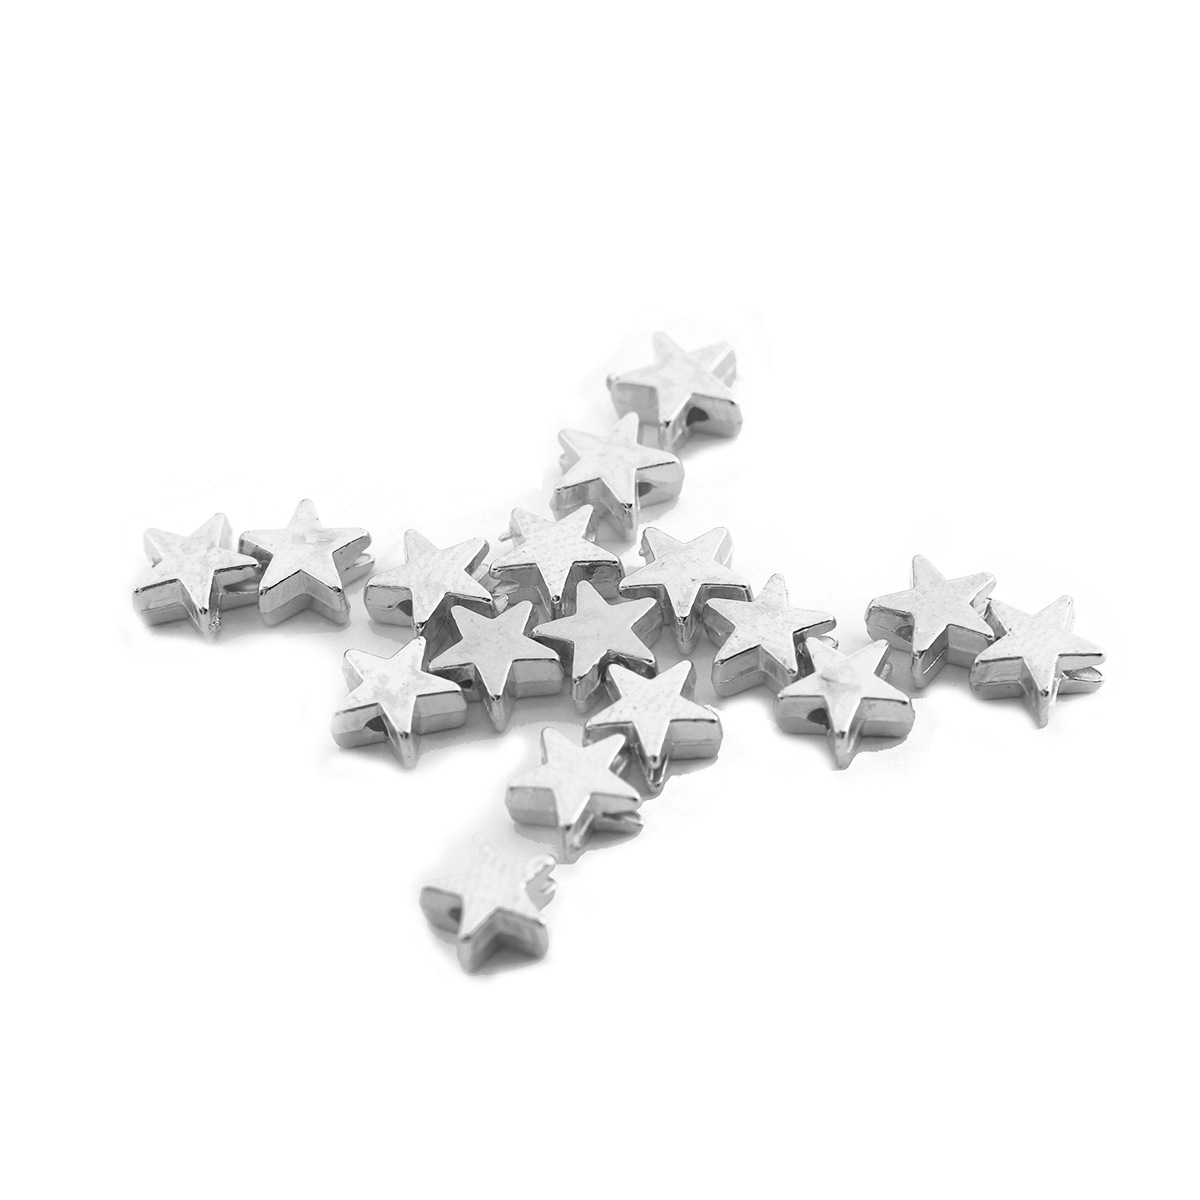 4:Silver five pointed star 6x6mm, 1mm